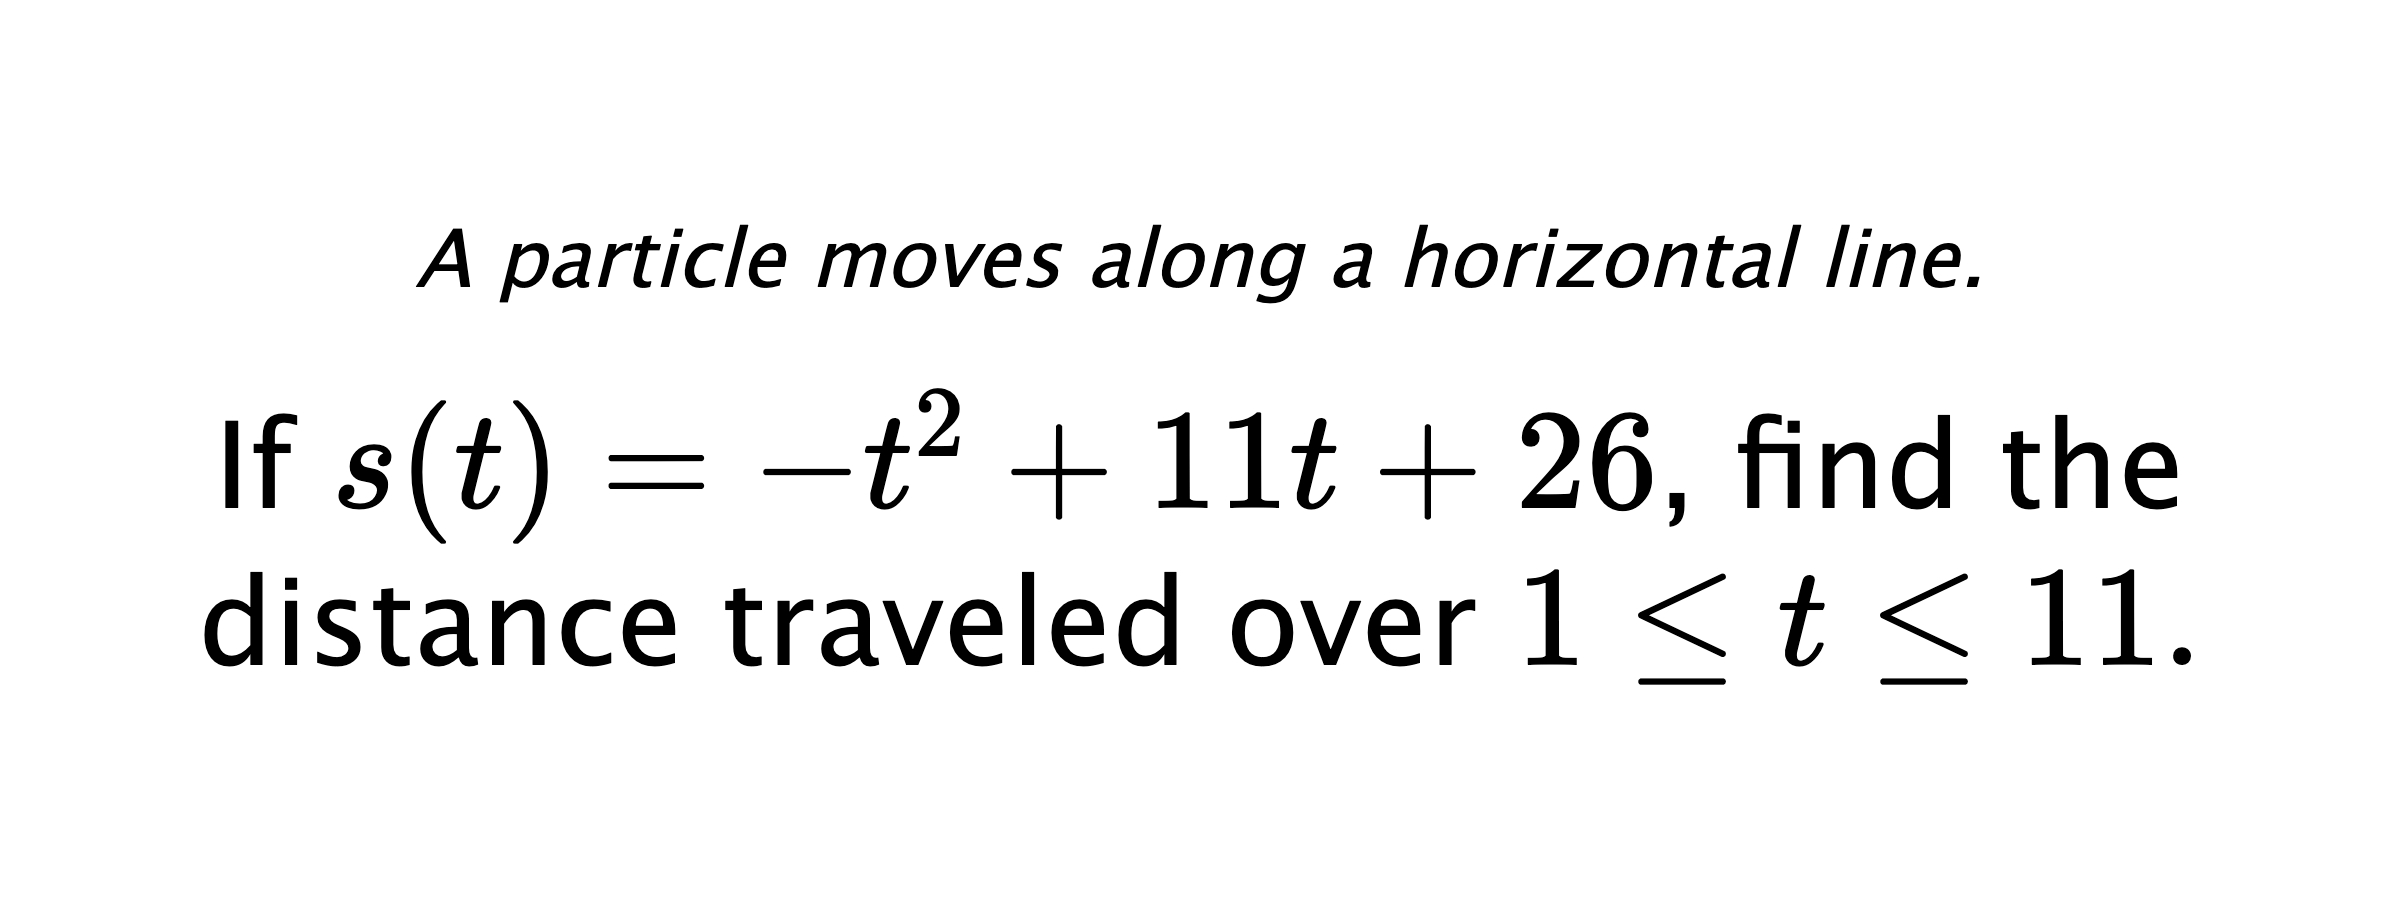 A particle moves along a horizontal line. If $ s(t)=-t^2+11t+26 $, find the distance traveled over $ 1 \leq t \leq 11. $